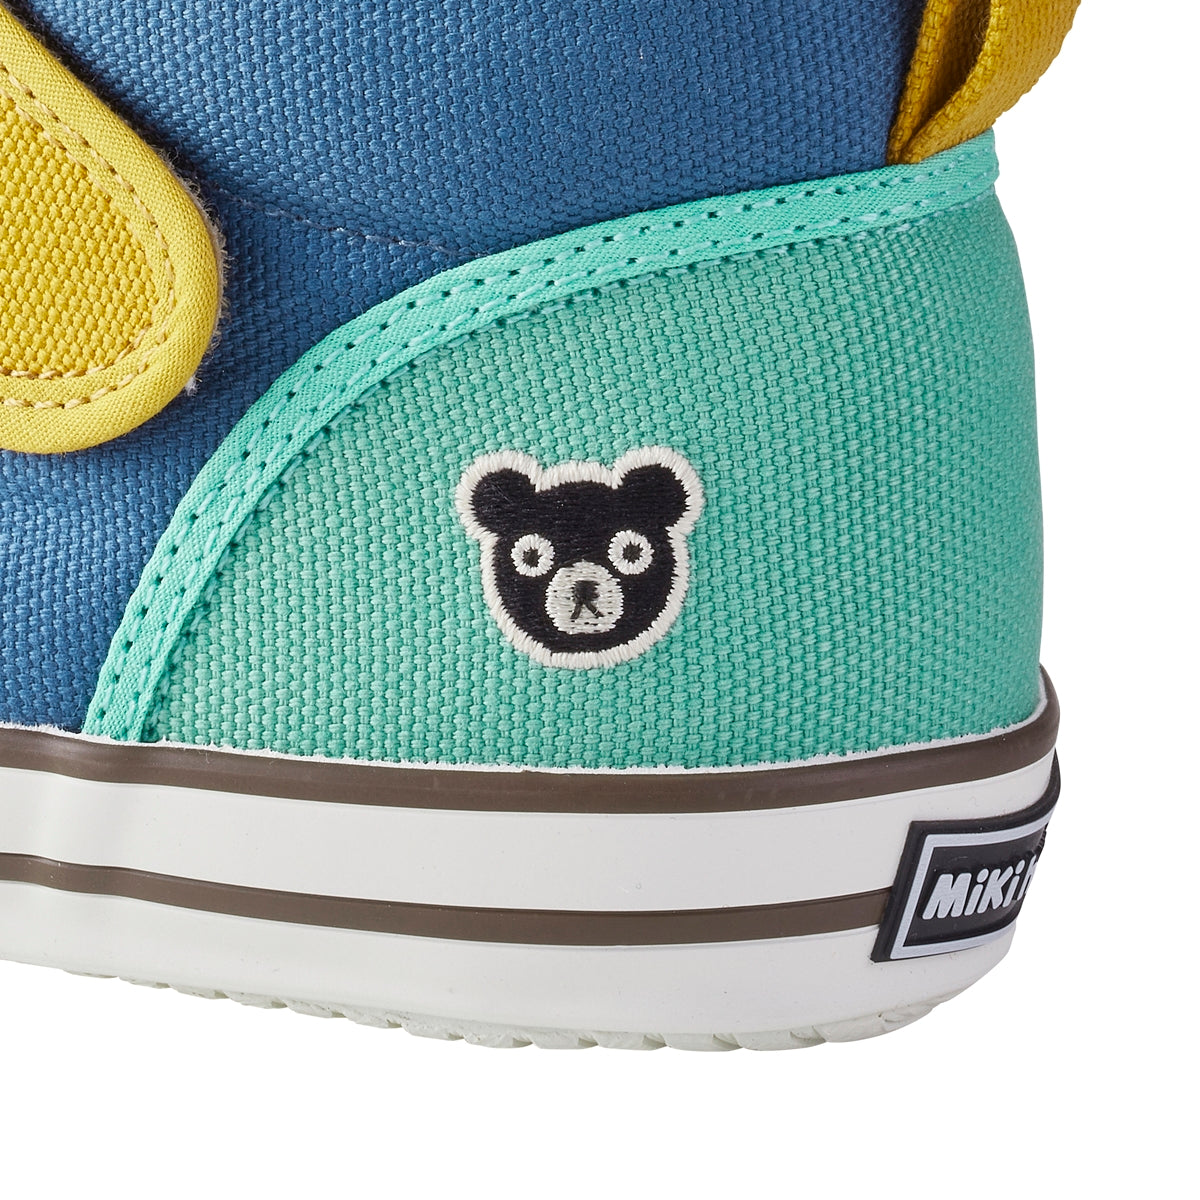 DOUBLE_B Oxford-Meets-Texture Sneakers for Kids